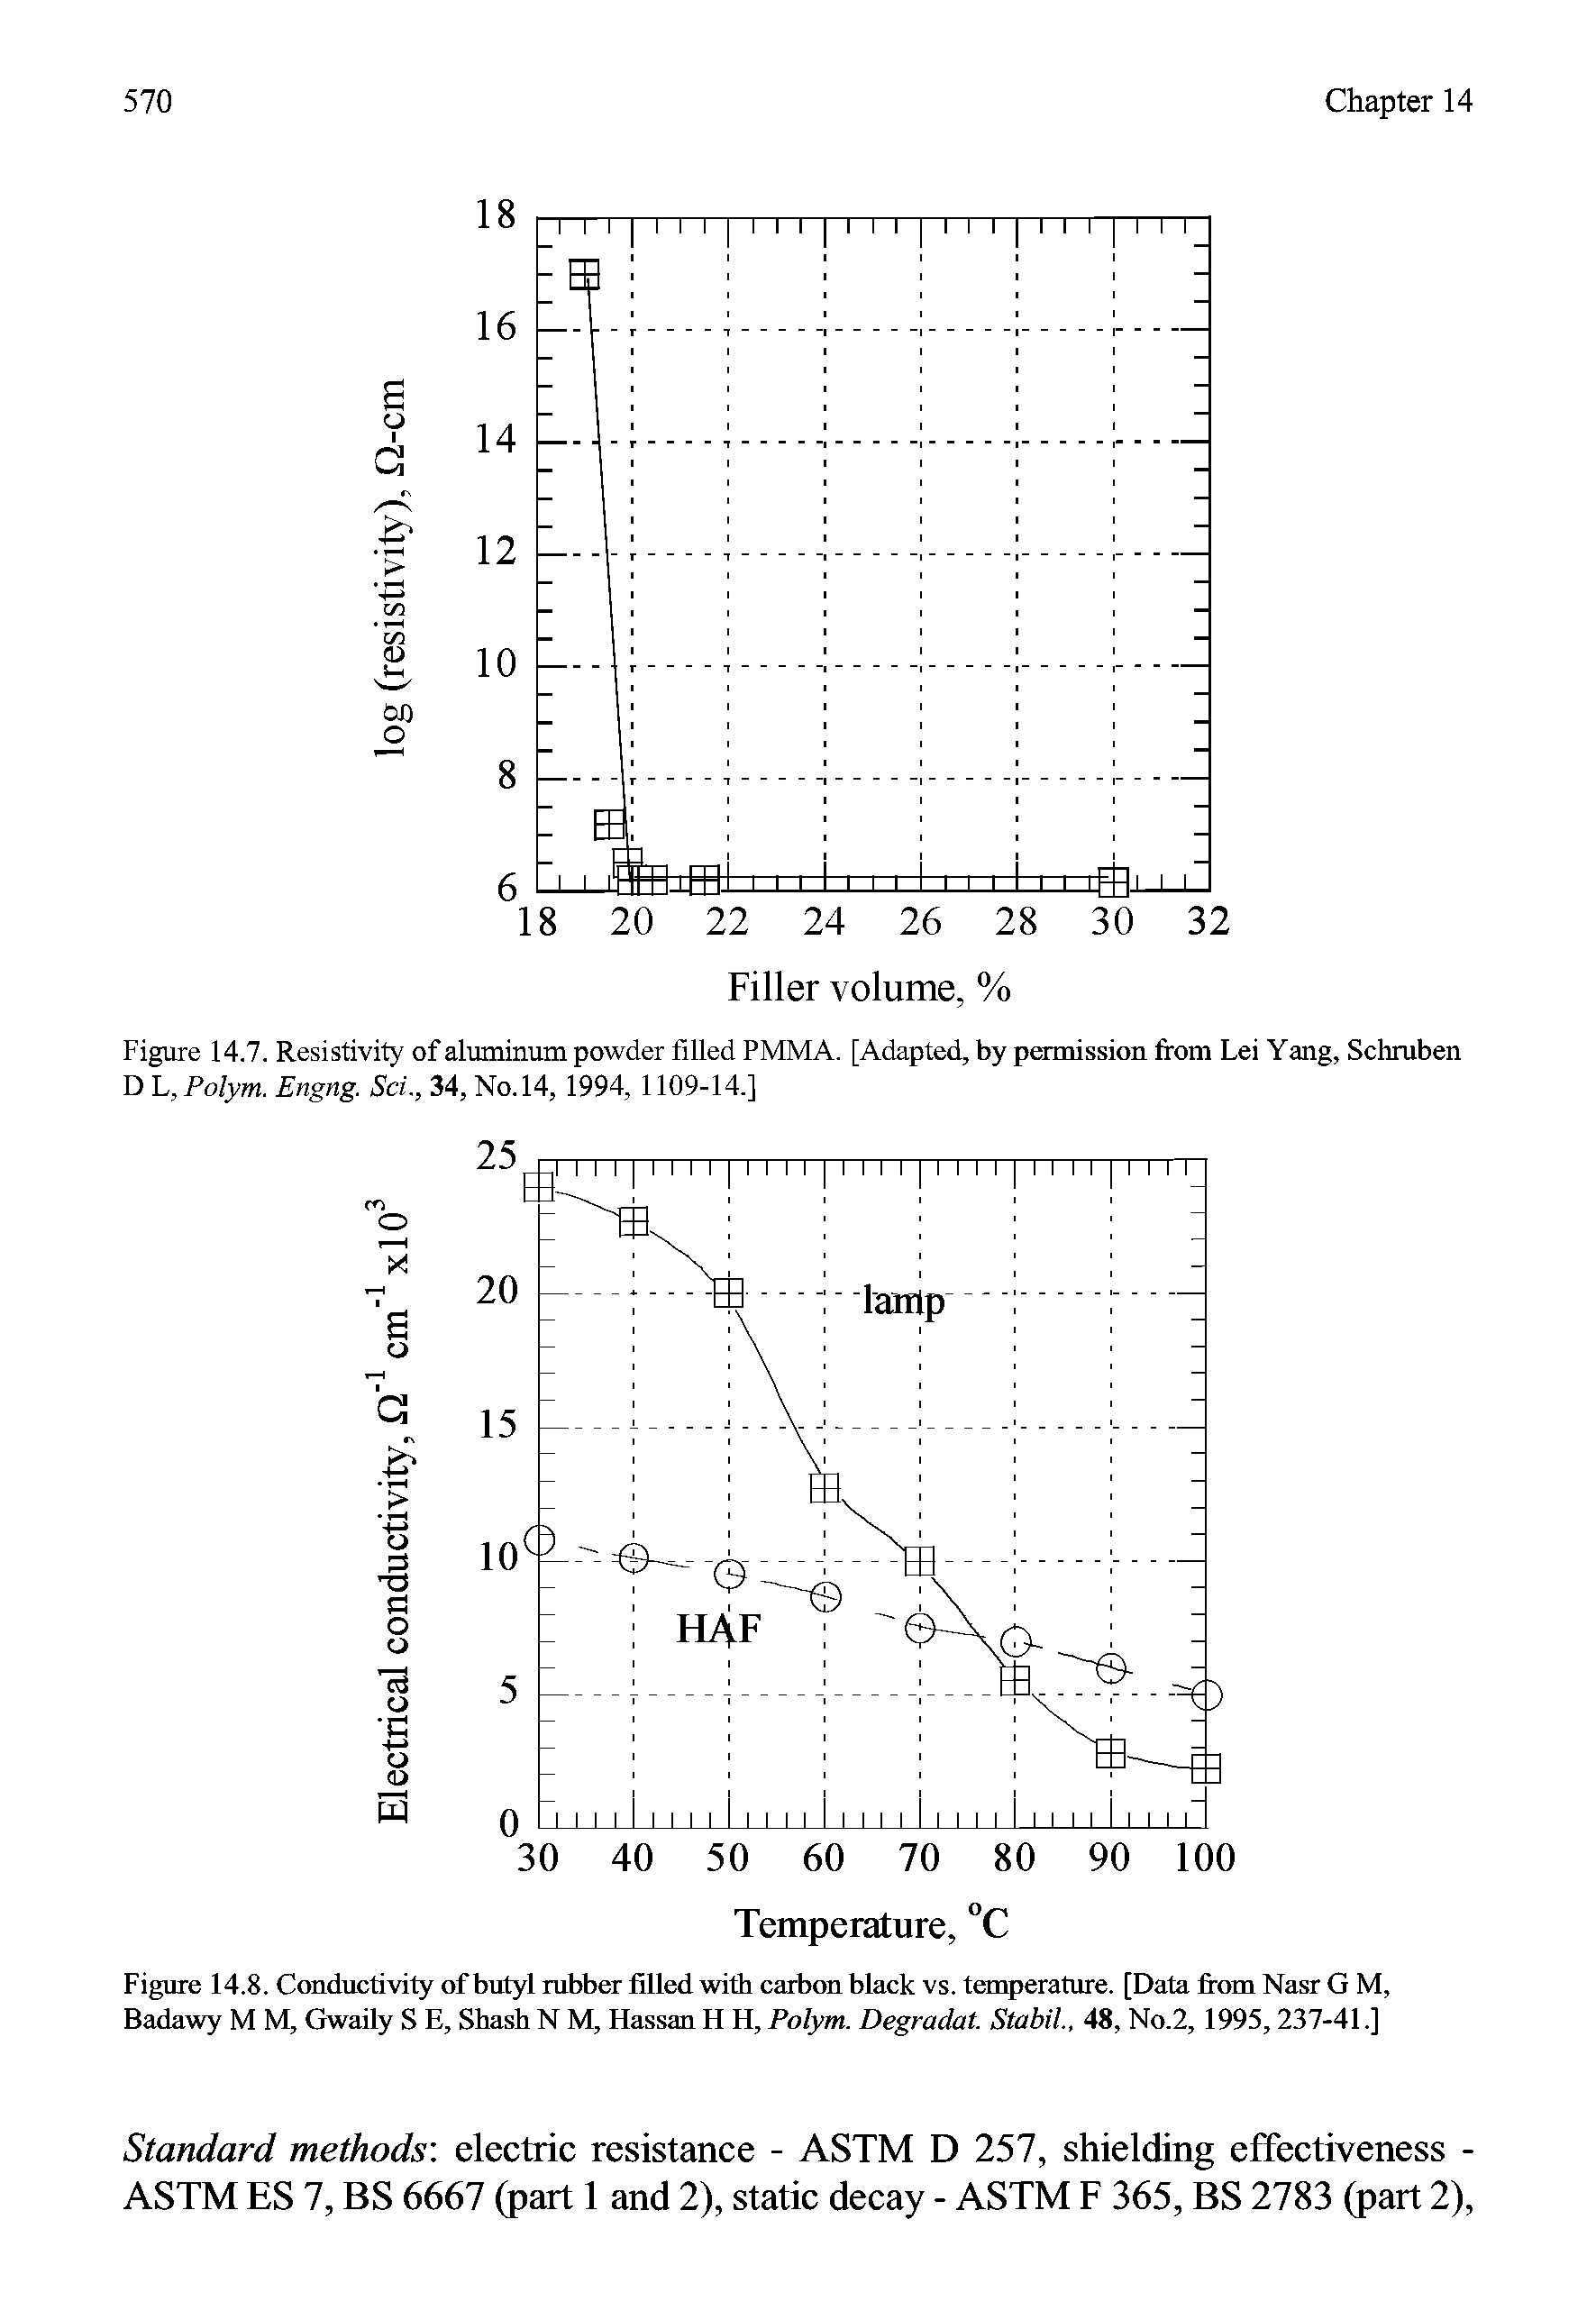 Figure 14.8. Conductivity of butyl rubber filled with carbon black vs. temperature. [Data from Nasr G M, Badawy M M, Gwaily S E, Shash N M, Hassan H II, Polym. Degradat. Stabil., 48, No.2, 1995,237-41.]...